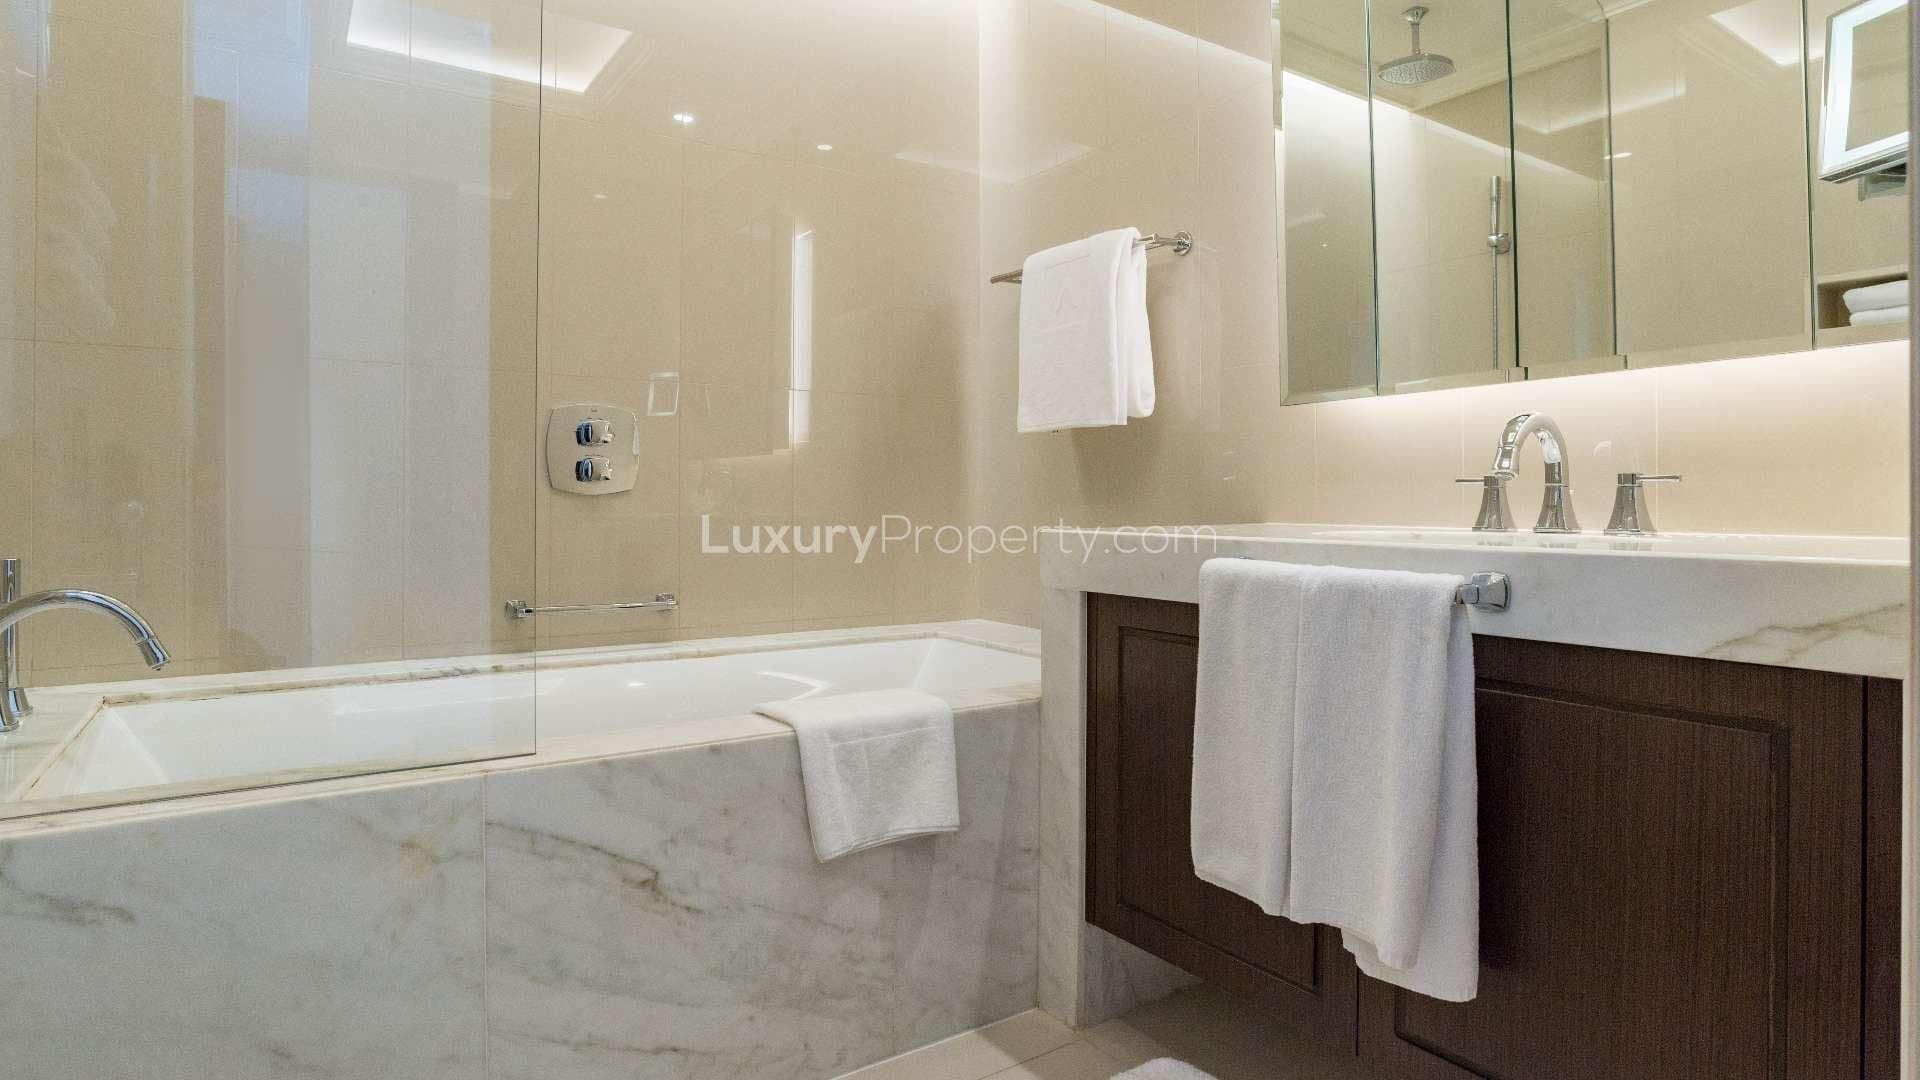 1 Bedroom Apartment For Sale The Address Residence Fountain Views Lp20135 2db67c0104b84e00.jpg